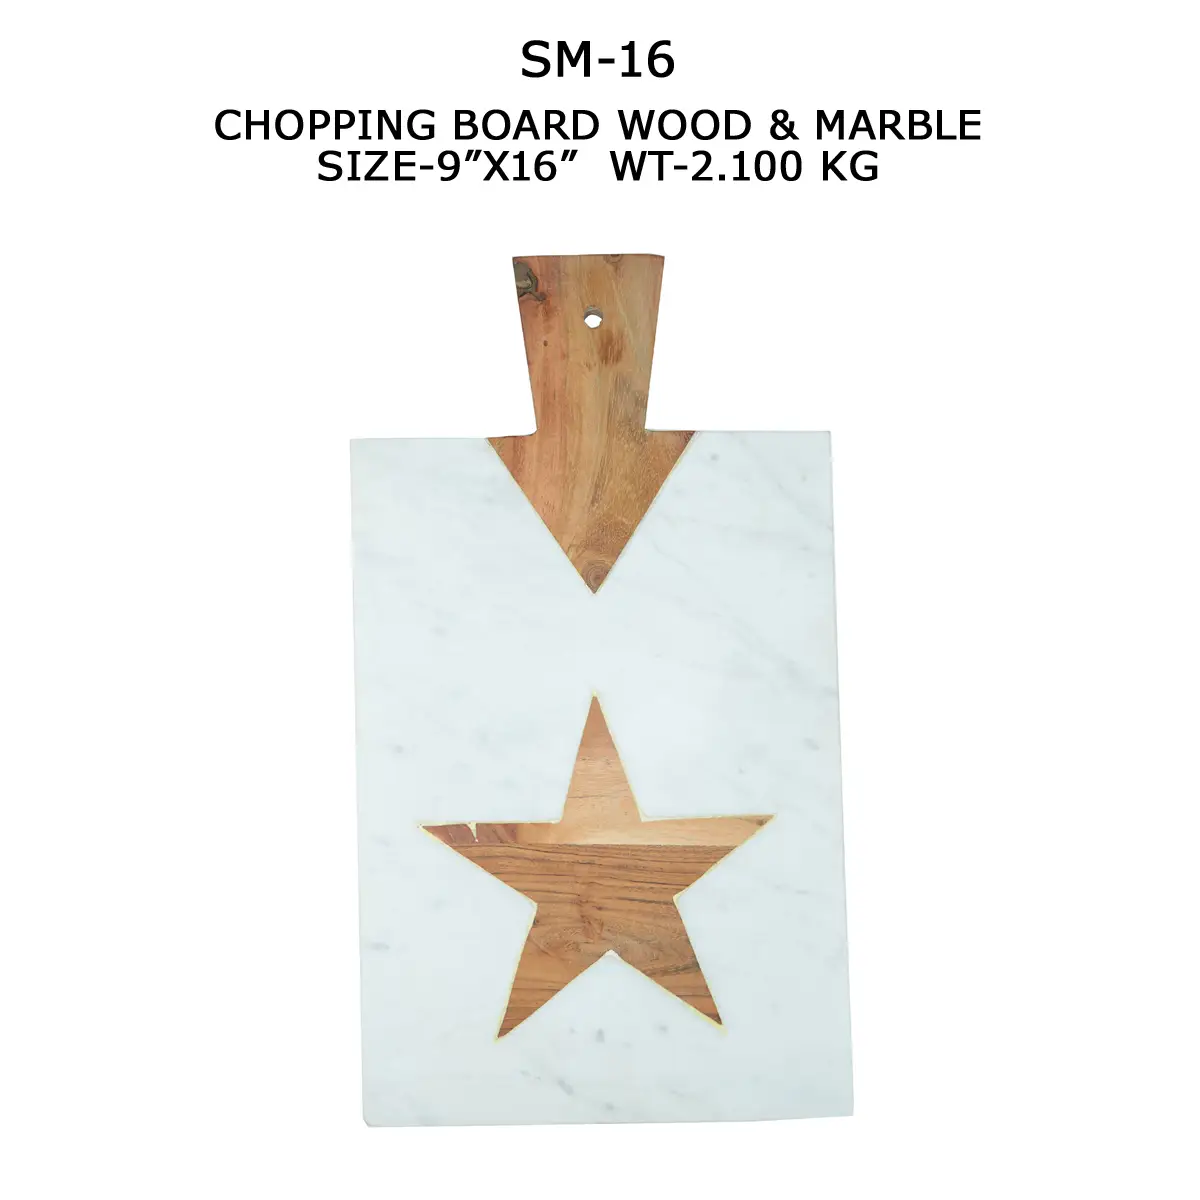 CHOPPING BOARD WITH STAR INLAY WOOD & MARBLE